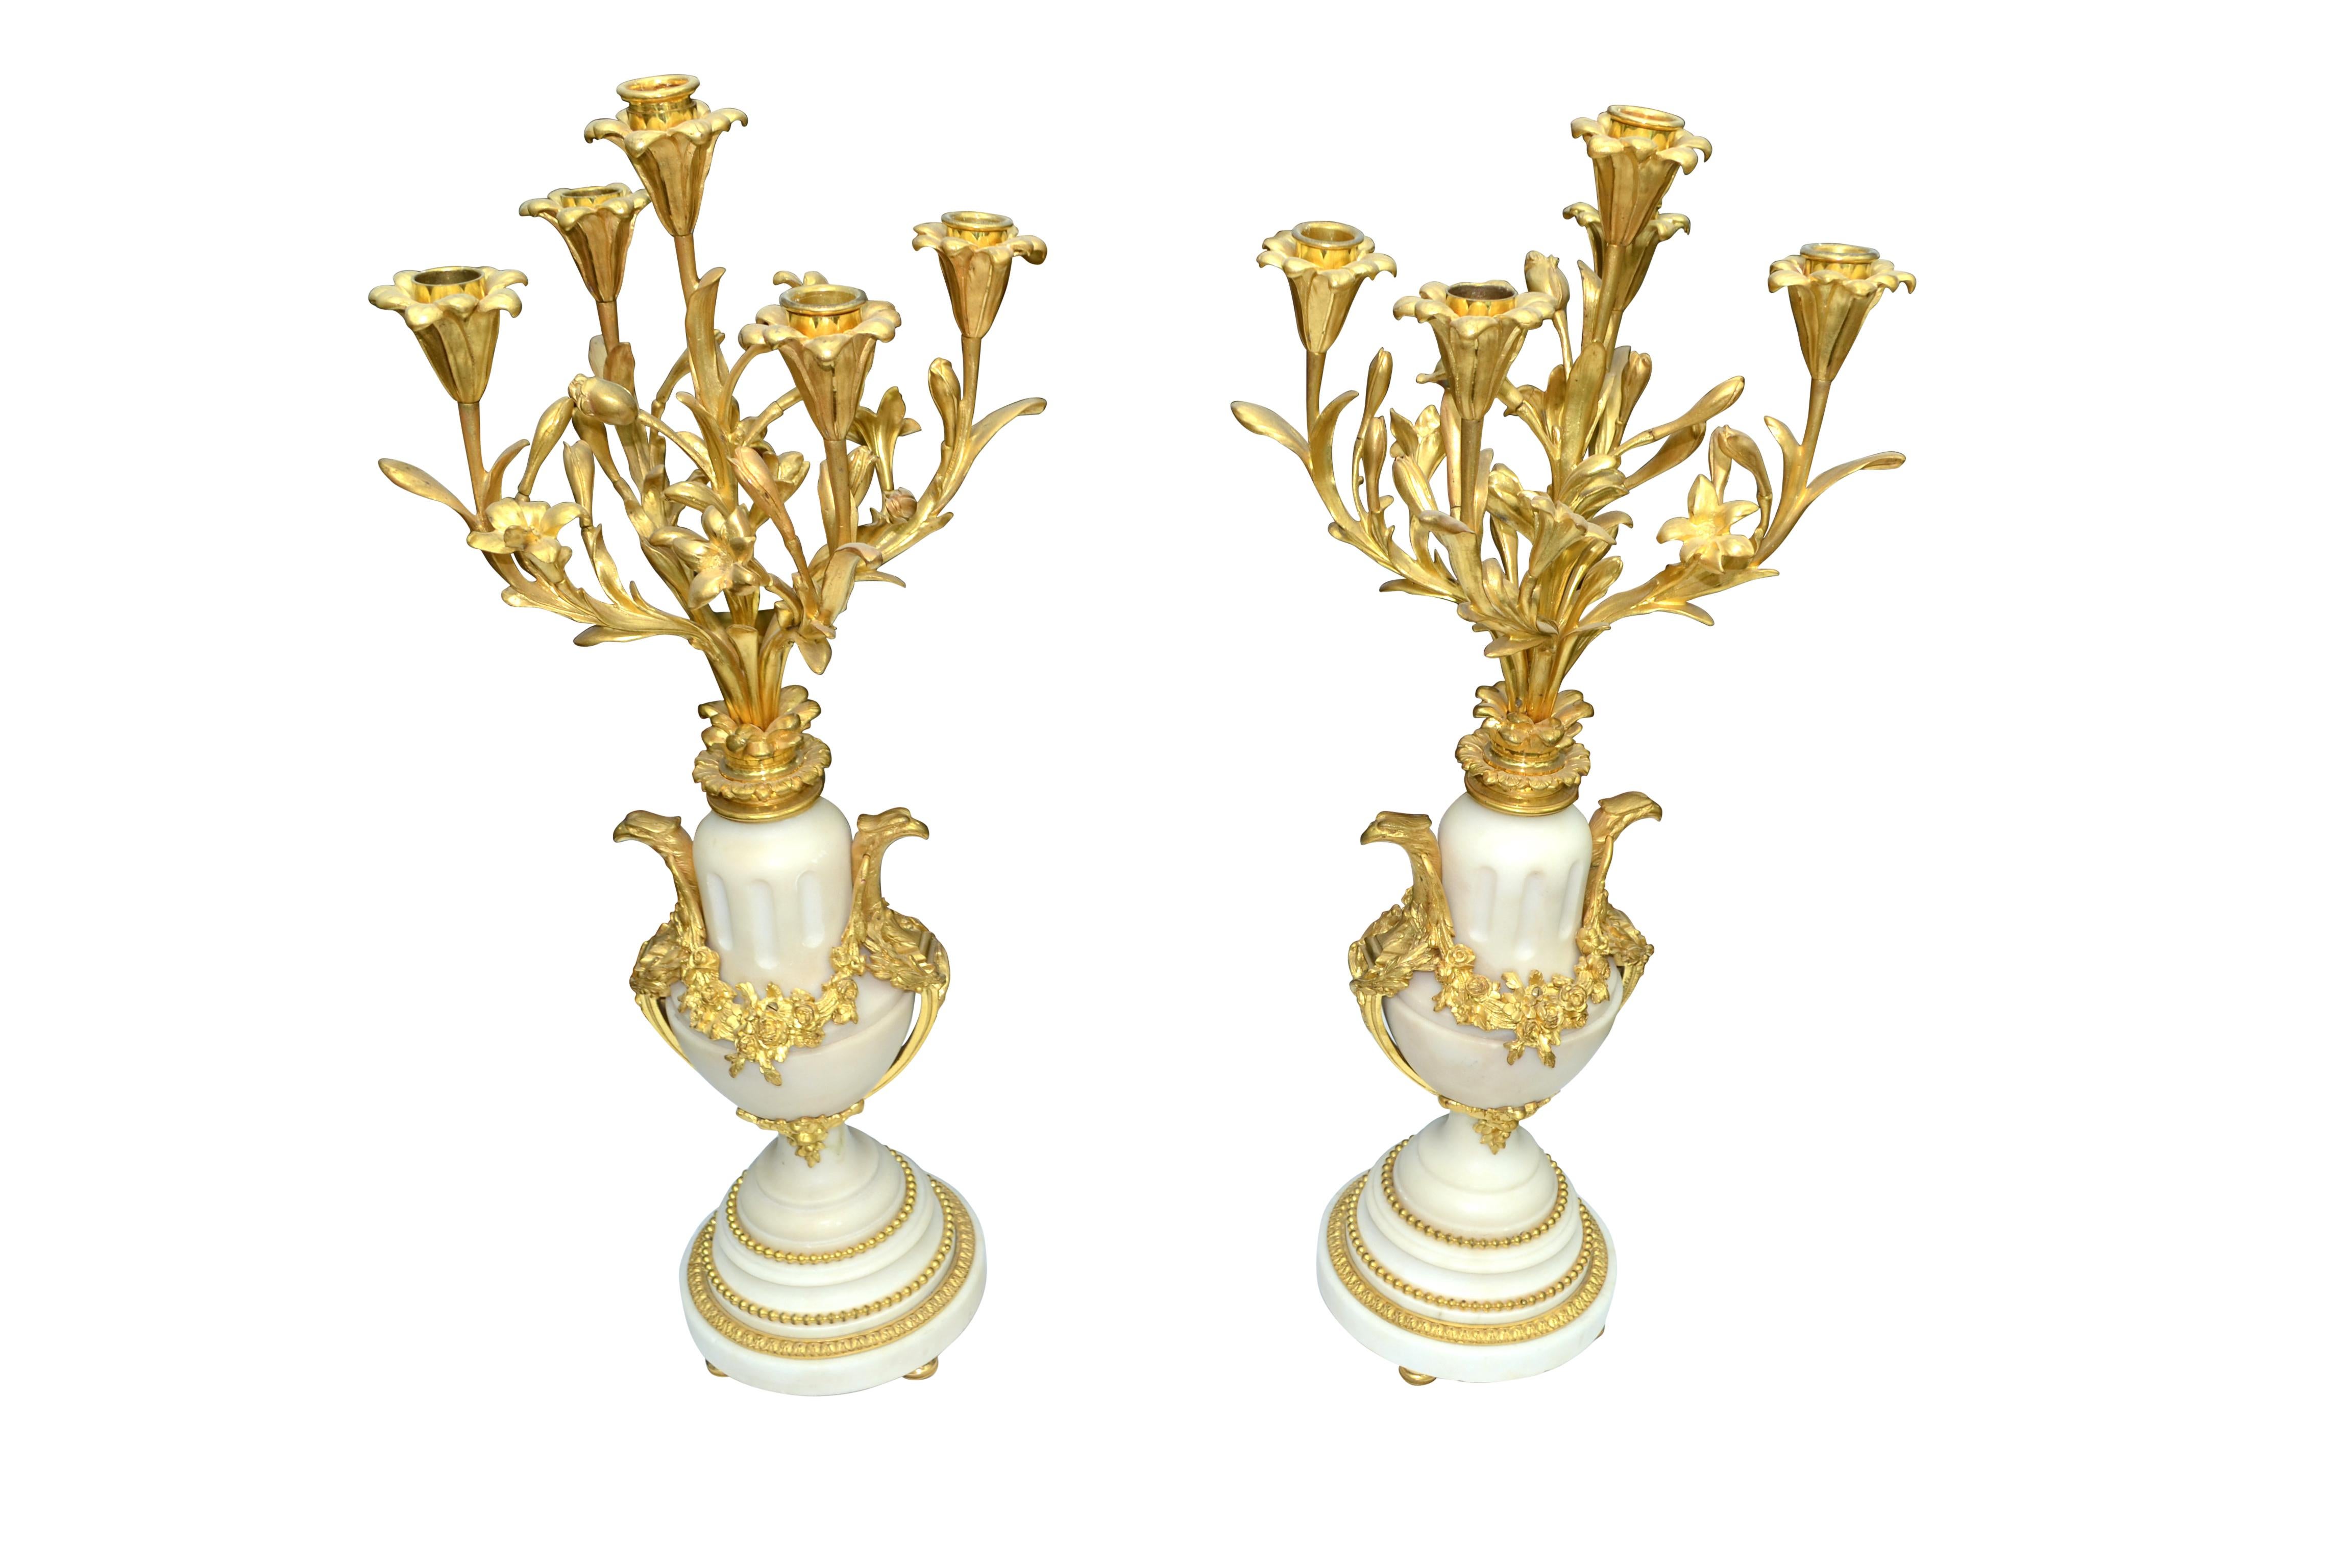 The white marble bodies of the candelabra are urn shaped and sit on circular stepped marble bases on gilt ball feet. On either side of the urns are stylized eagle head 'handles' which are joined along the wasted body of the urn with finely chased